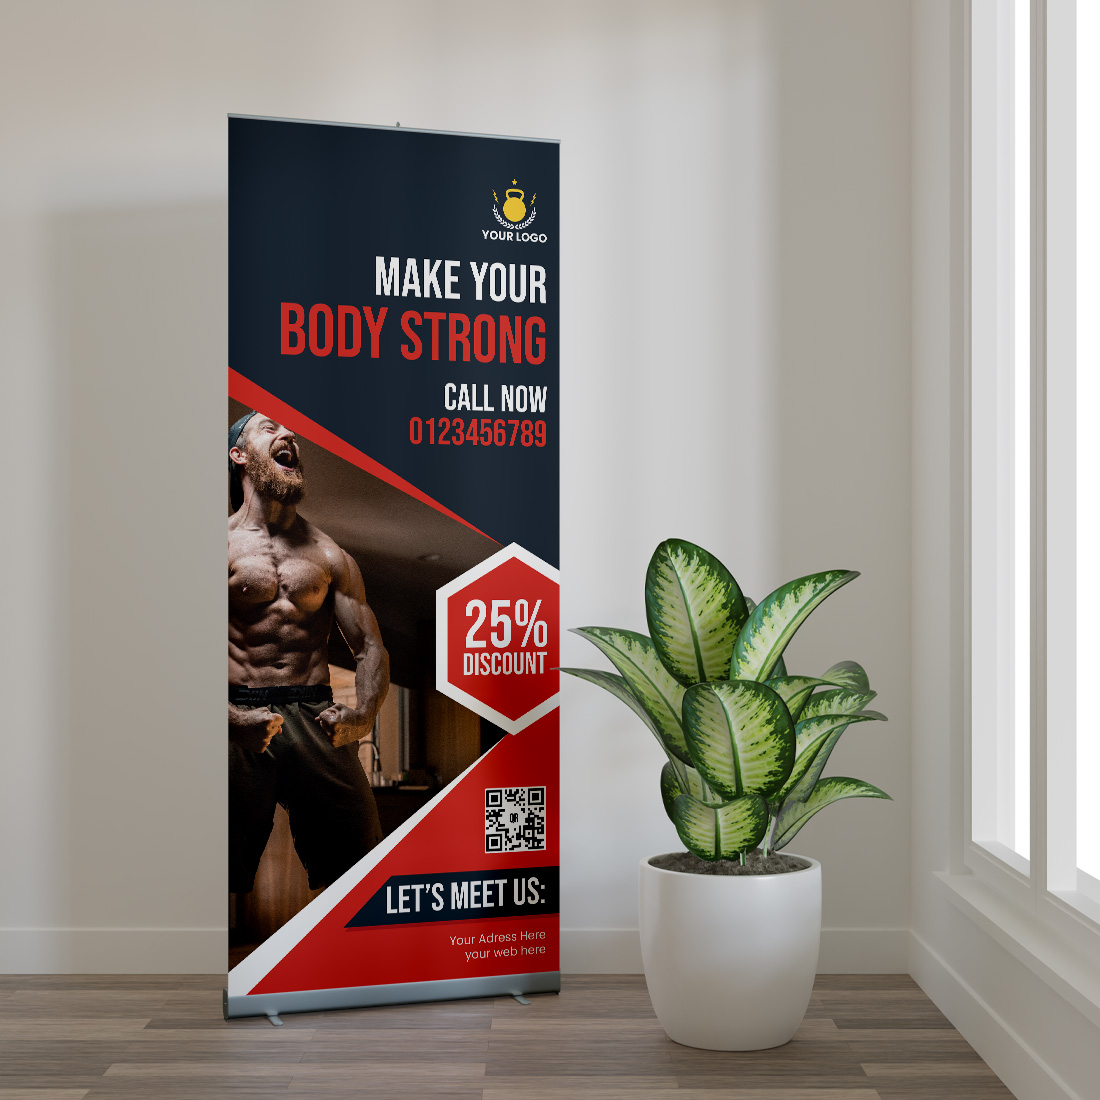 Sign advertising a bodybuilding program next to a potted plant.